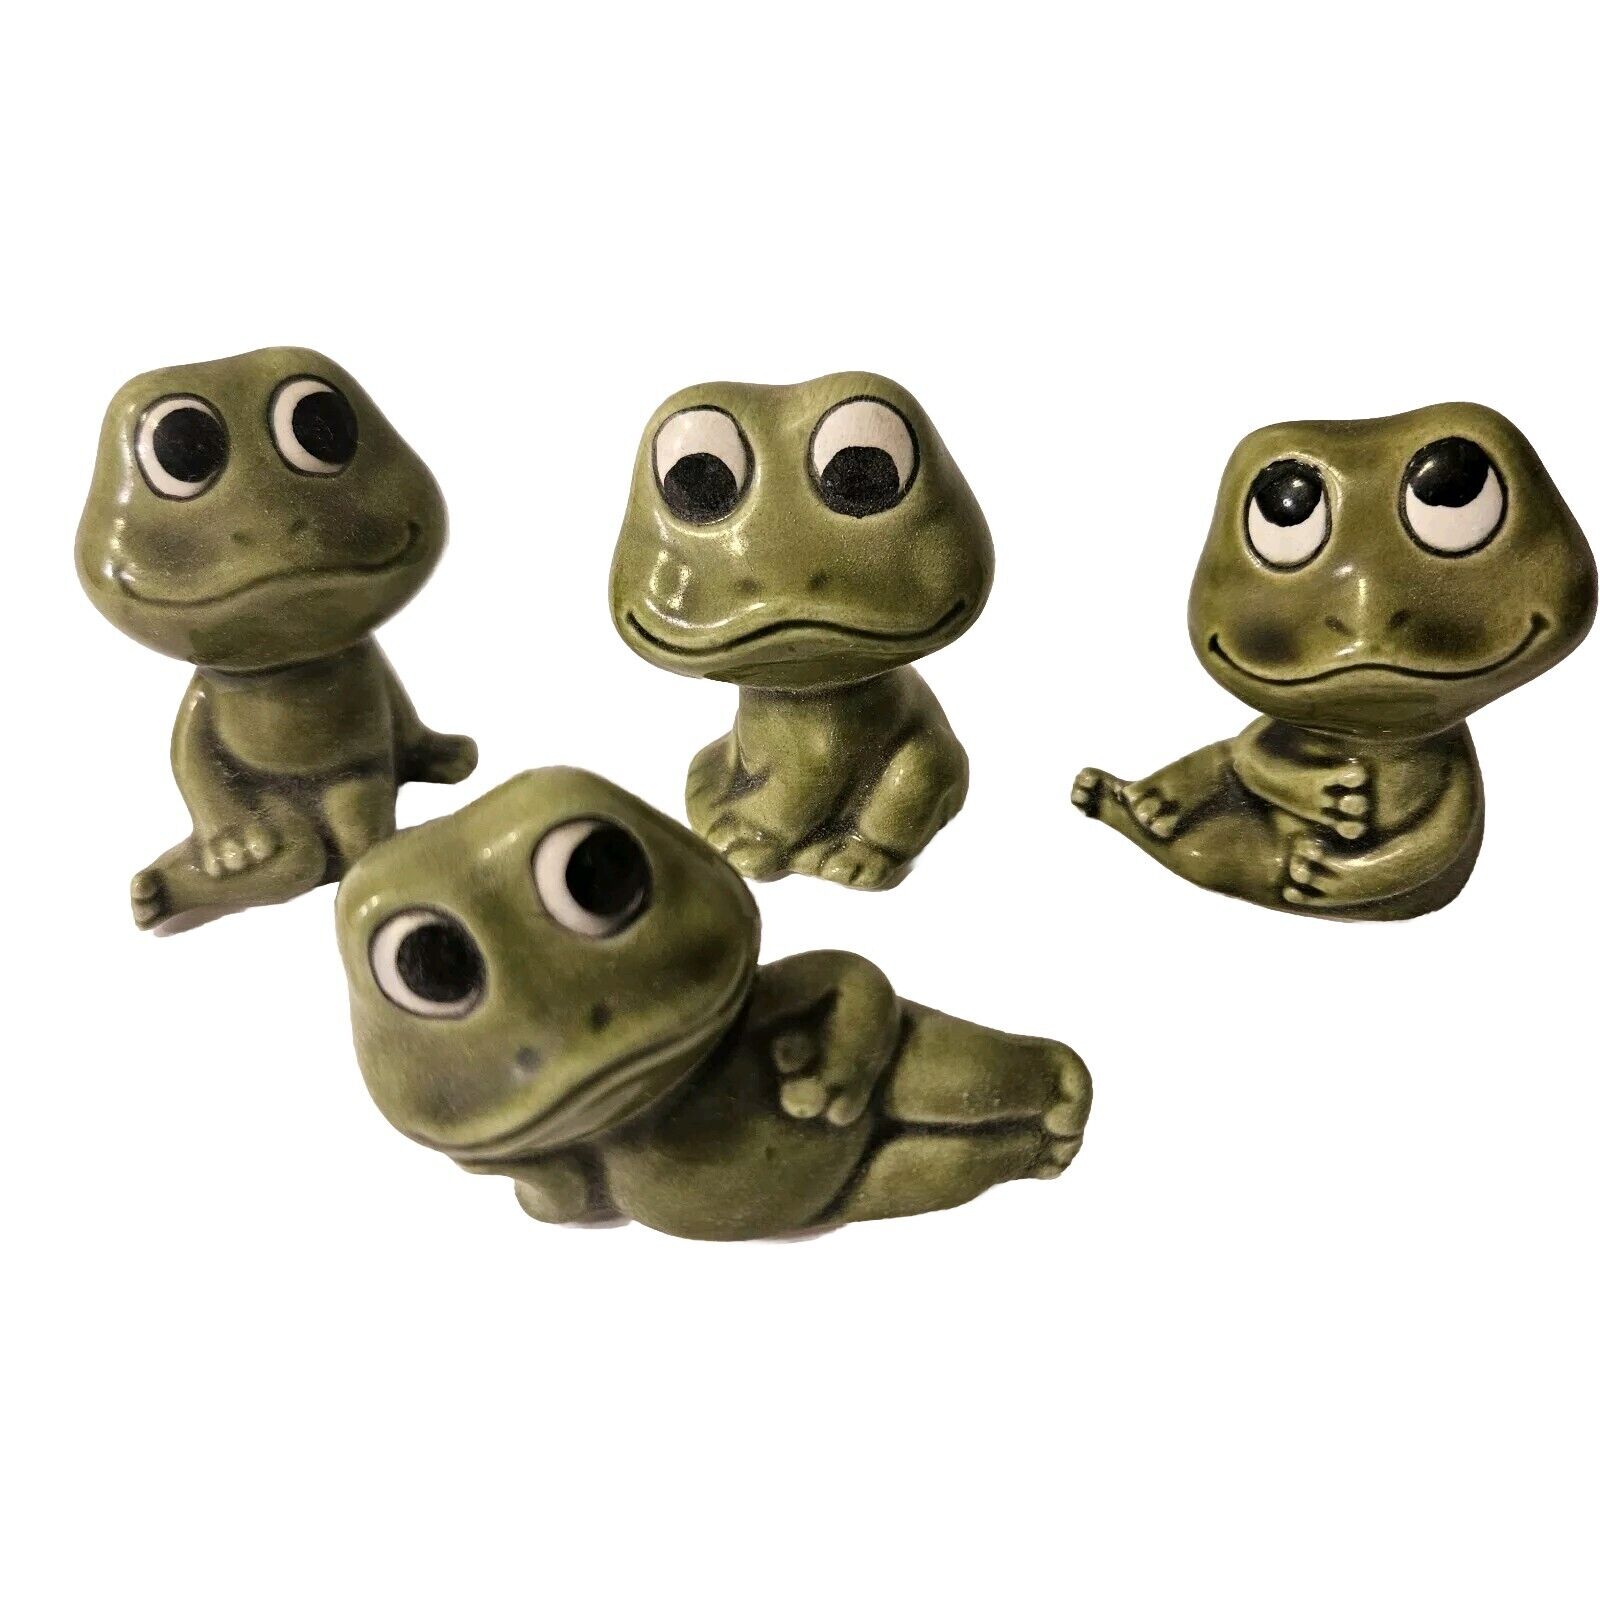 Lot 4 Vintage Sears Neil The Frog Figurines Anthropomorphic 